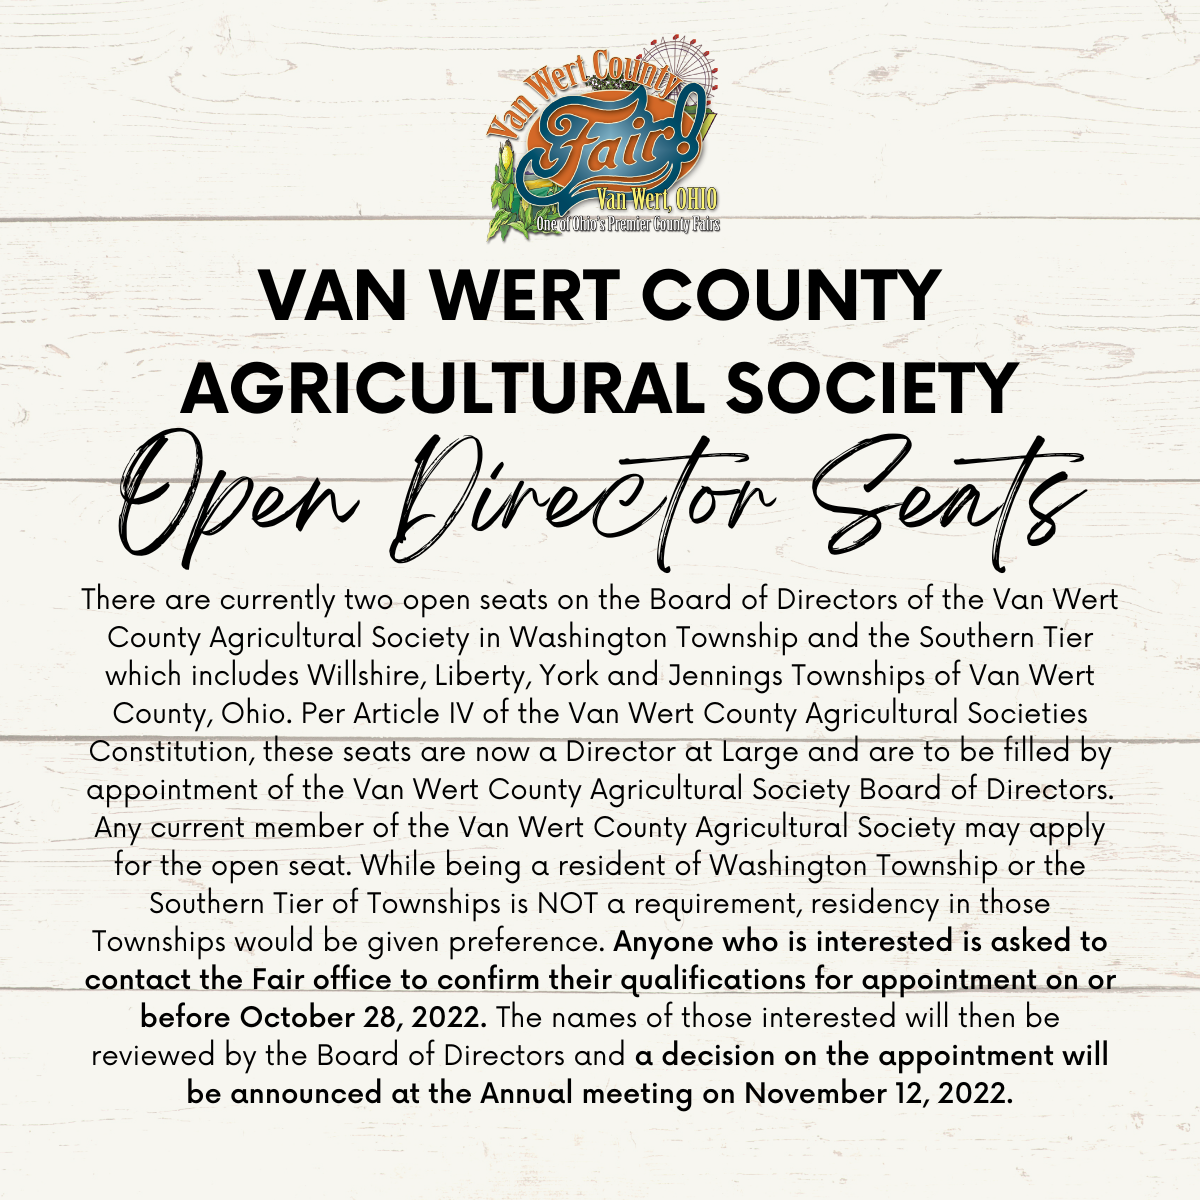 THE VAN WERT COUNTY AGRICULTURAL SOCIETY ANNOUNCES OPEN SEATS ON THE